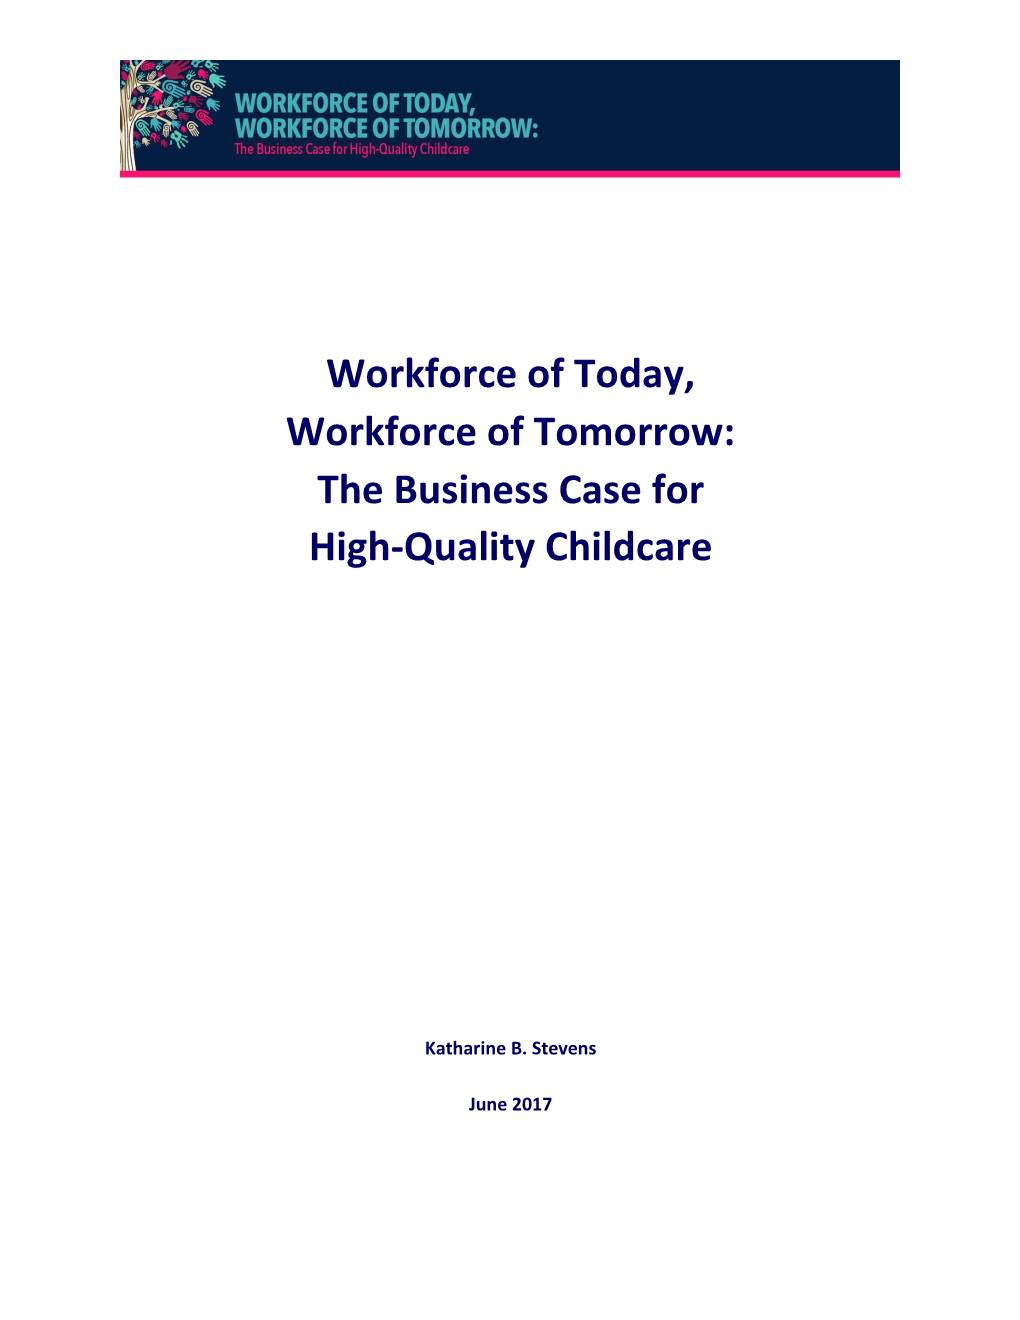 Workforce of Today, Workforce of Tomorrow: the Business Case for High-Quality Childcare